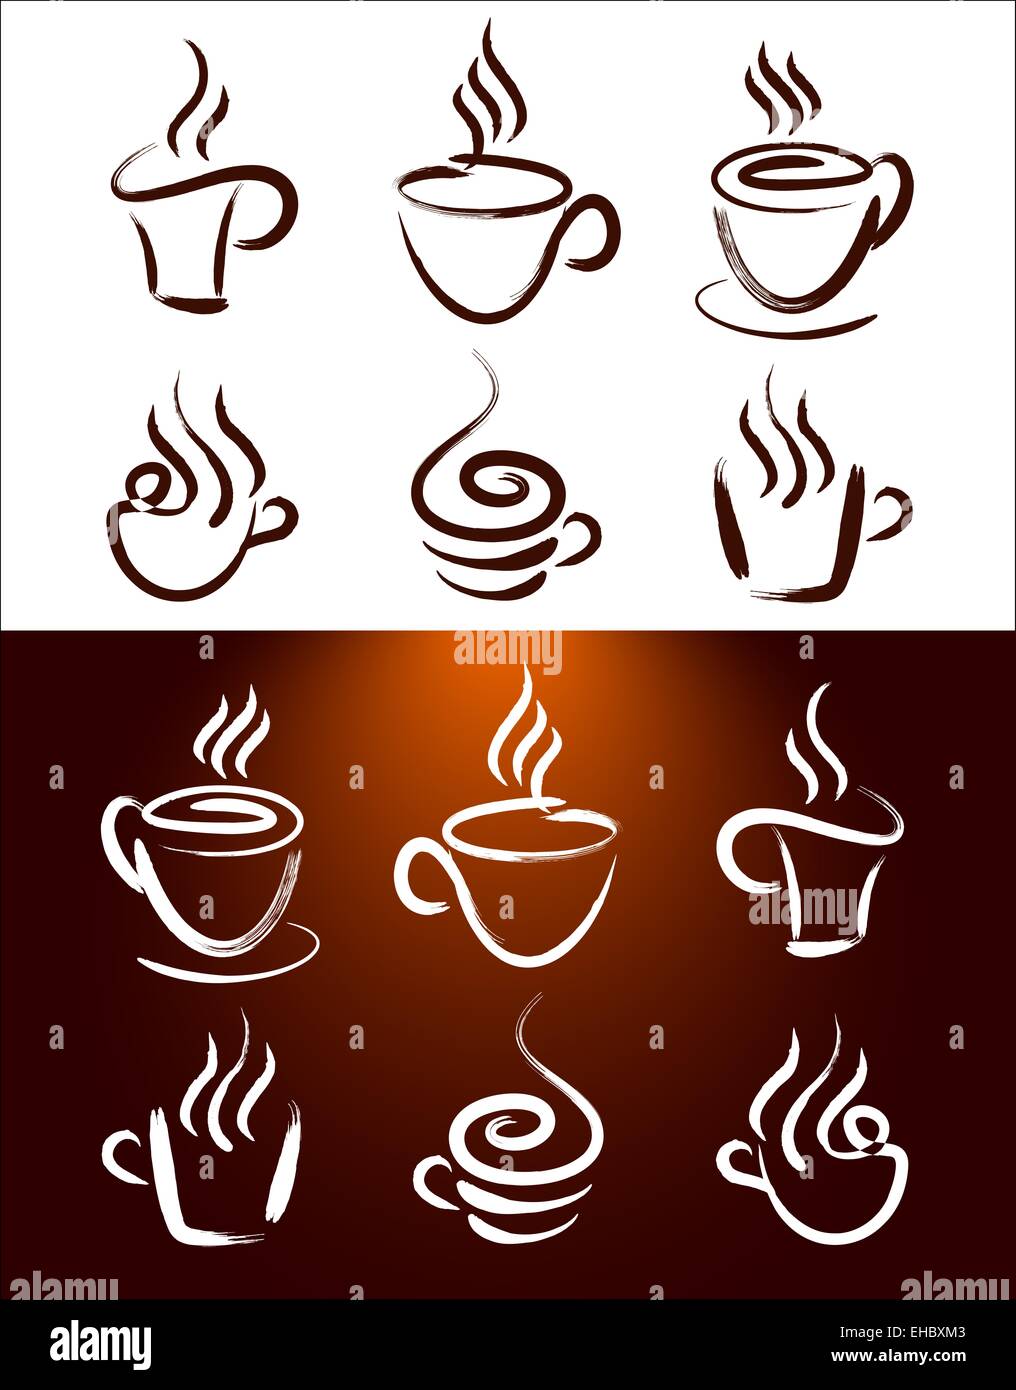 Coffee Cup icon Set. Creative abstract coffee cups with hot steam Stock ...